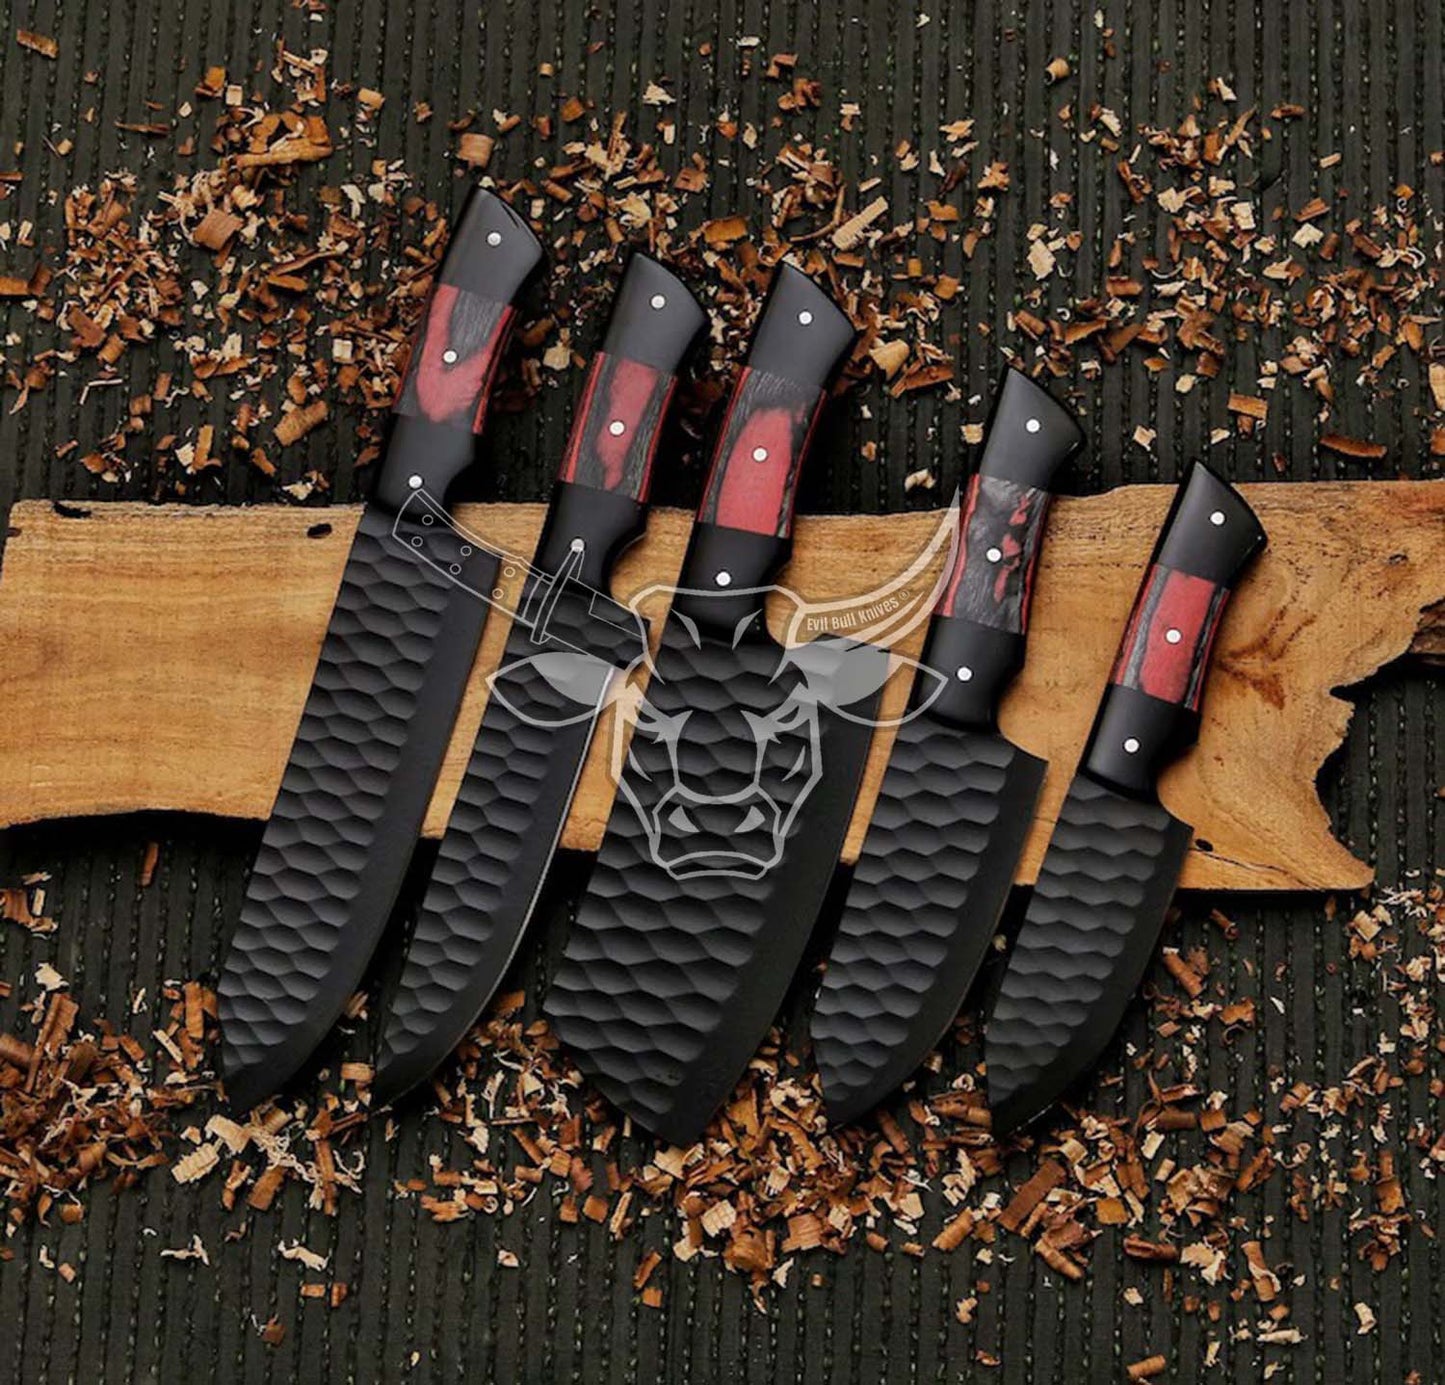 EBK-150 Custom Handmade Carbon Steel chef Set With Cow Leather Sheath Anniversary Gift, Birthday Gift ,Christmas Gift For Him